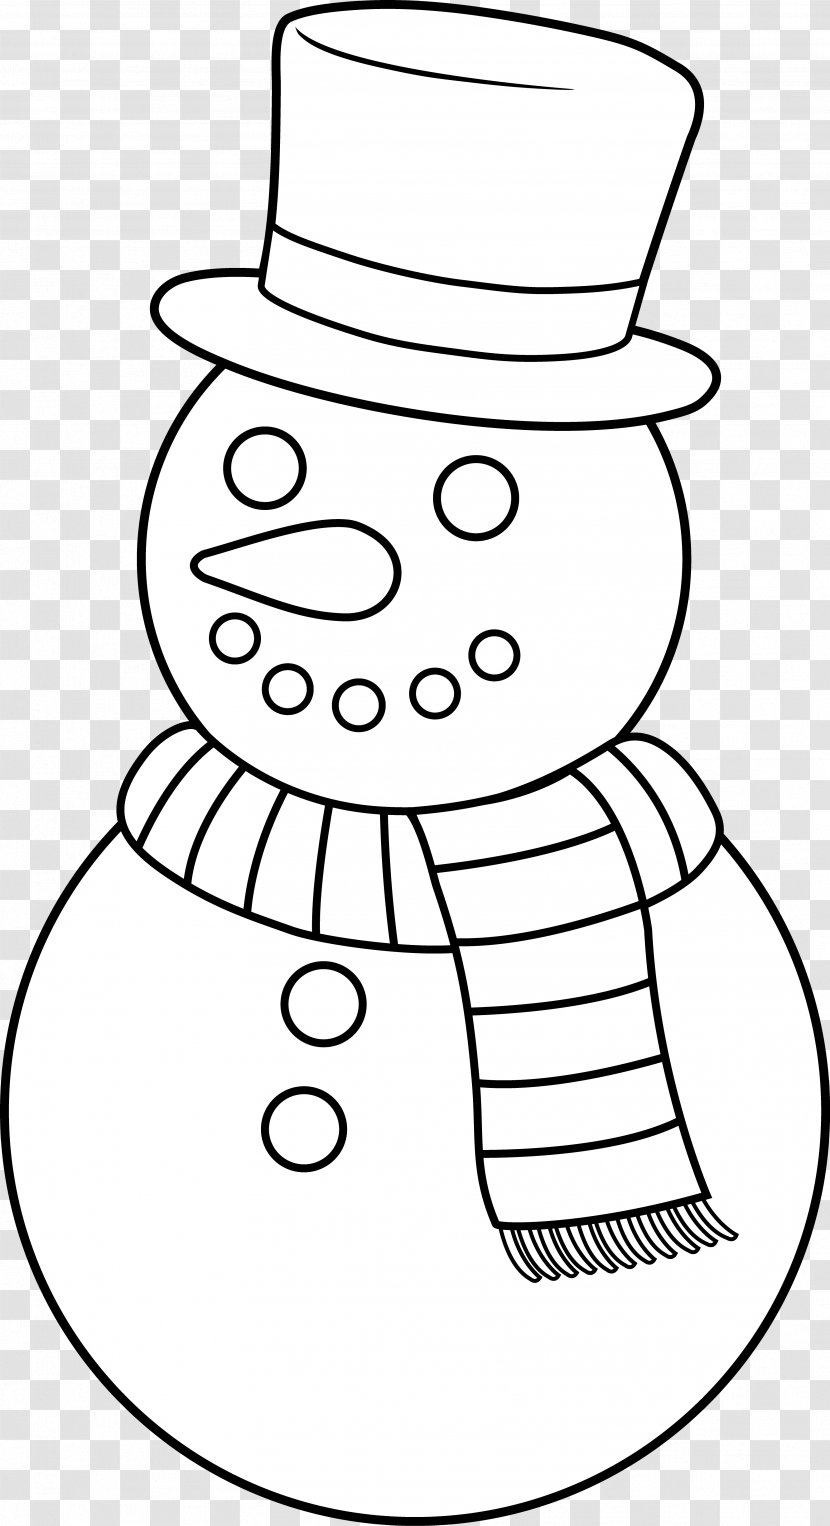 Snowman Black And White Christmas Clip Art - Blog - Pictures Transparent PNG